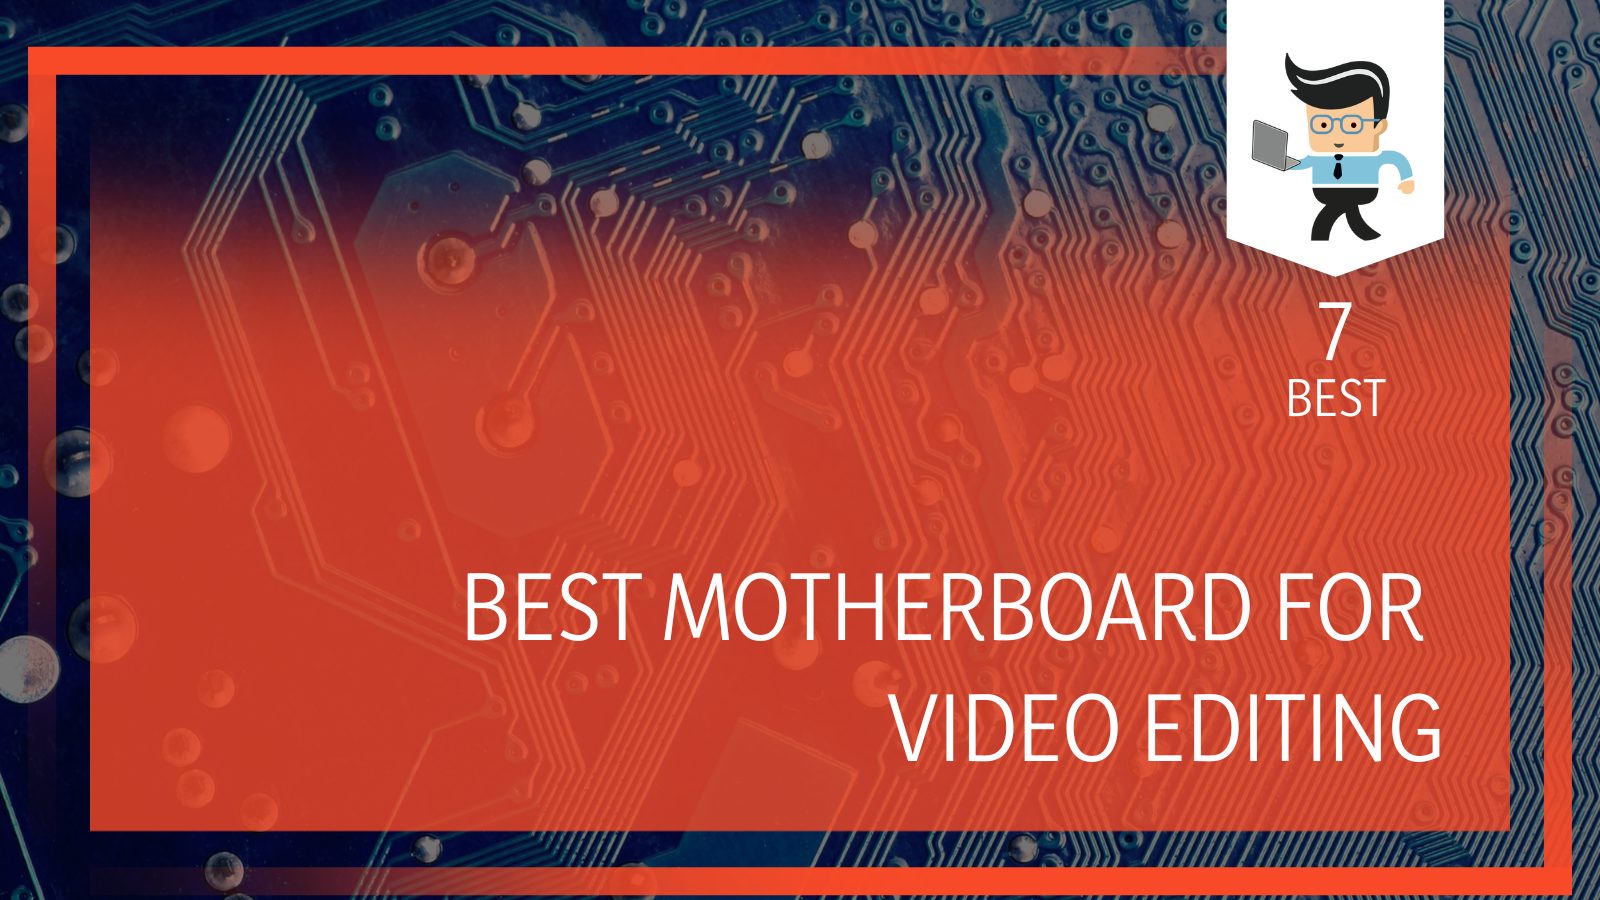 Pick Up the Best Motherboard for Video Editing